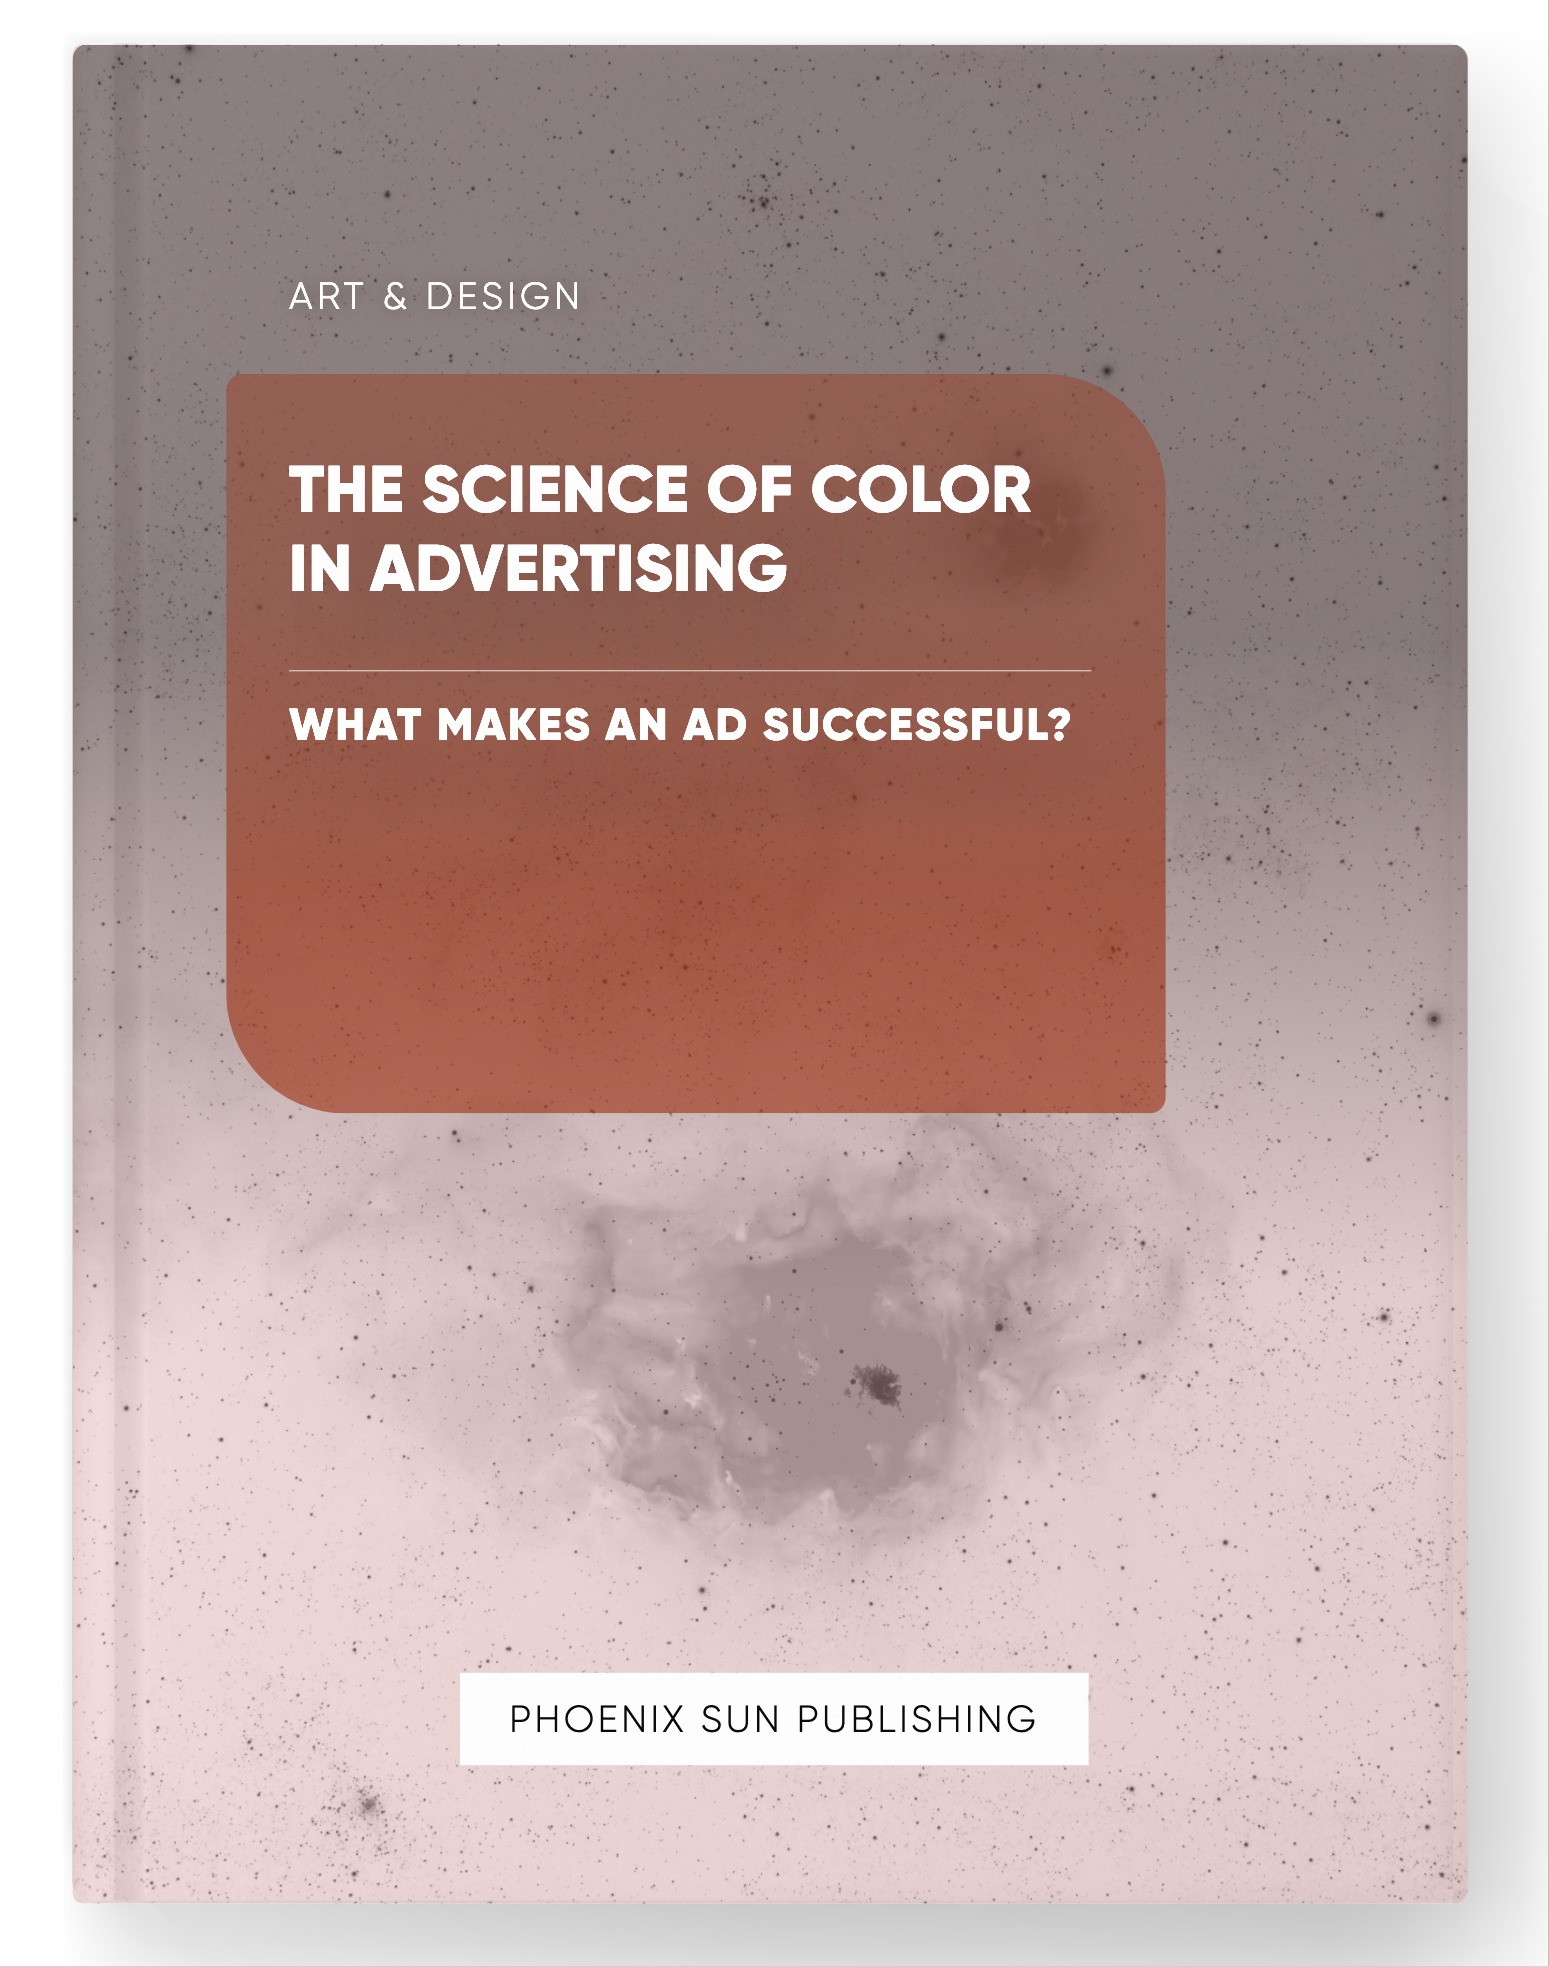 The Science of Color in Advertising – What Makes an Ad Successful?